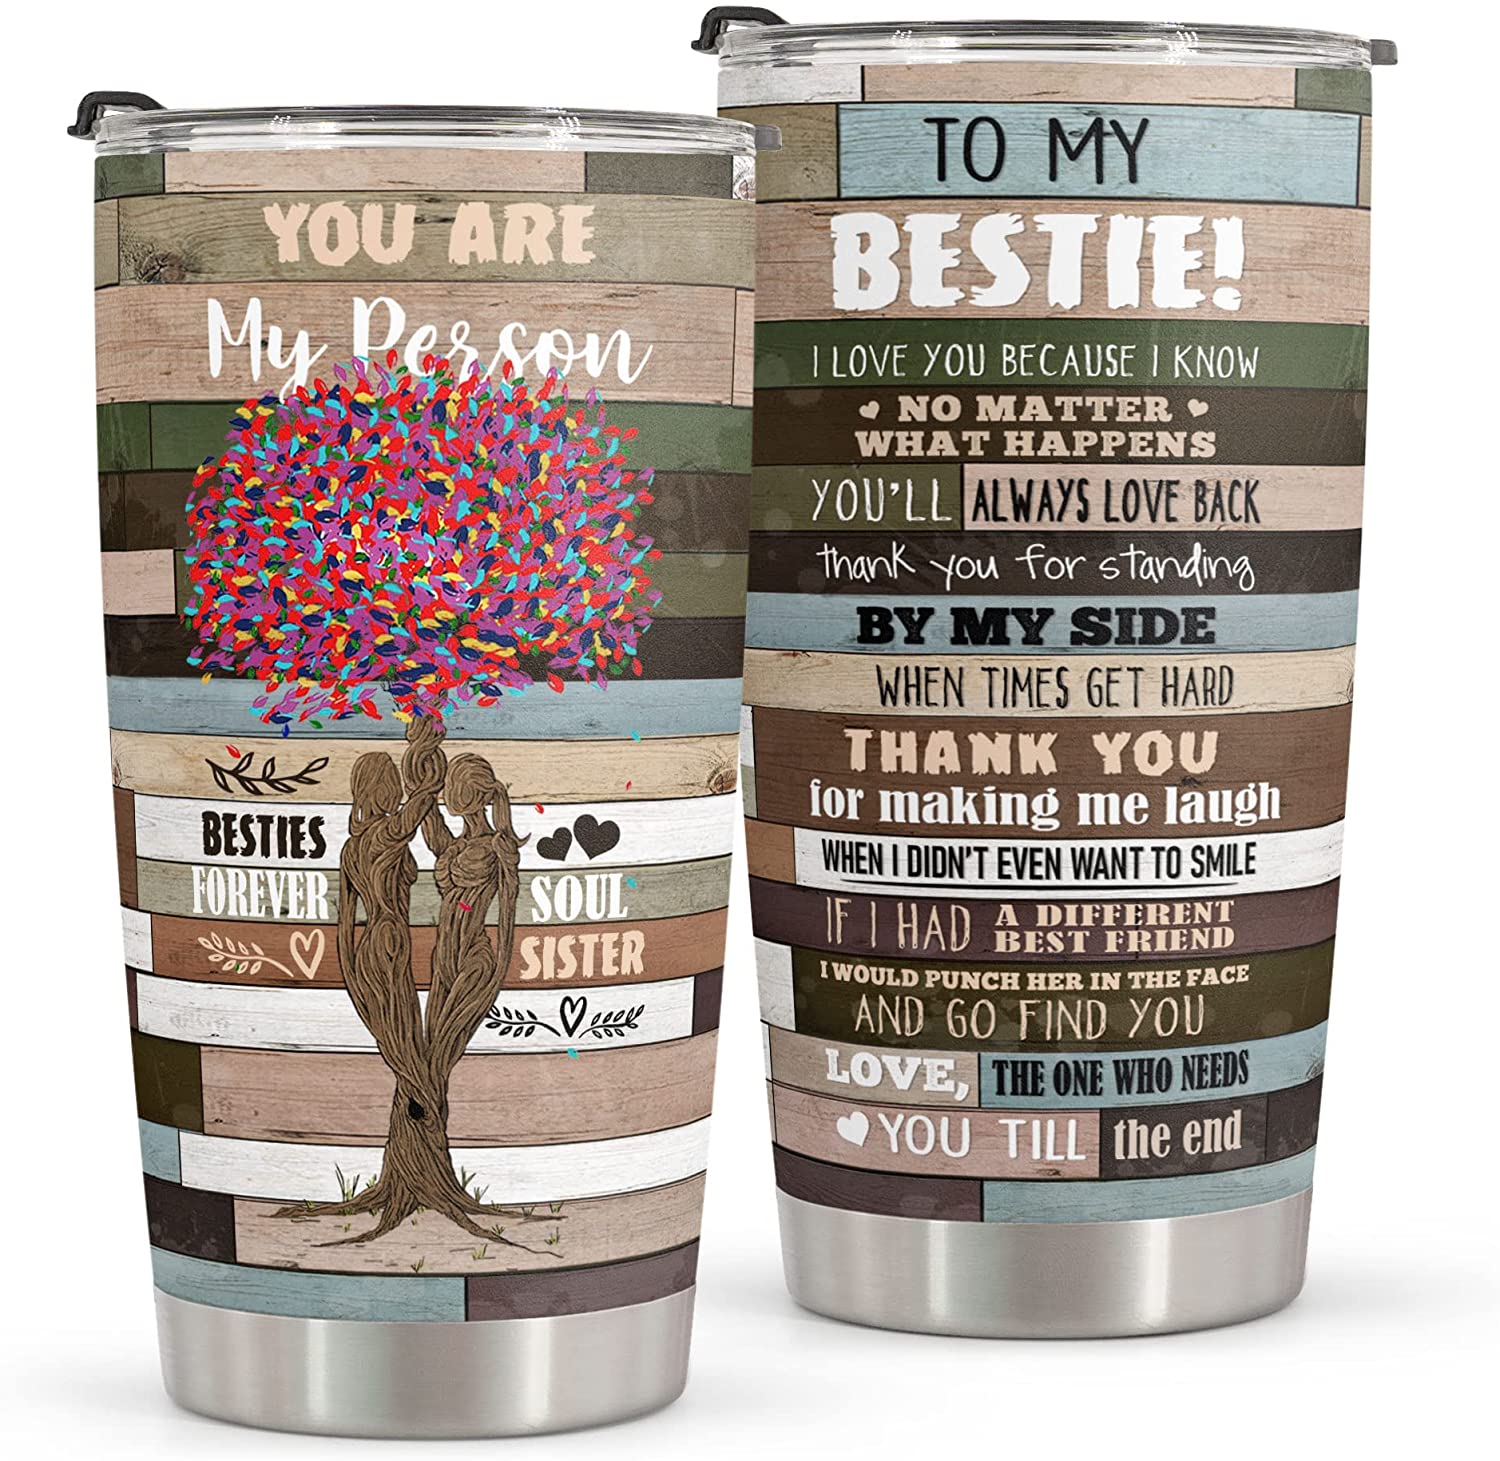 Gifts For Best Friend Women - Stainless Steel Tumbler 20oz Gifts For Women  - Unique Gift For Bestie, Soul Sister, BFF, Coworker Birthday Gift Idea For  Best Friend Friendship Gifts For Women 